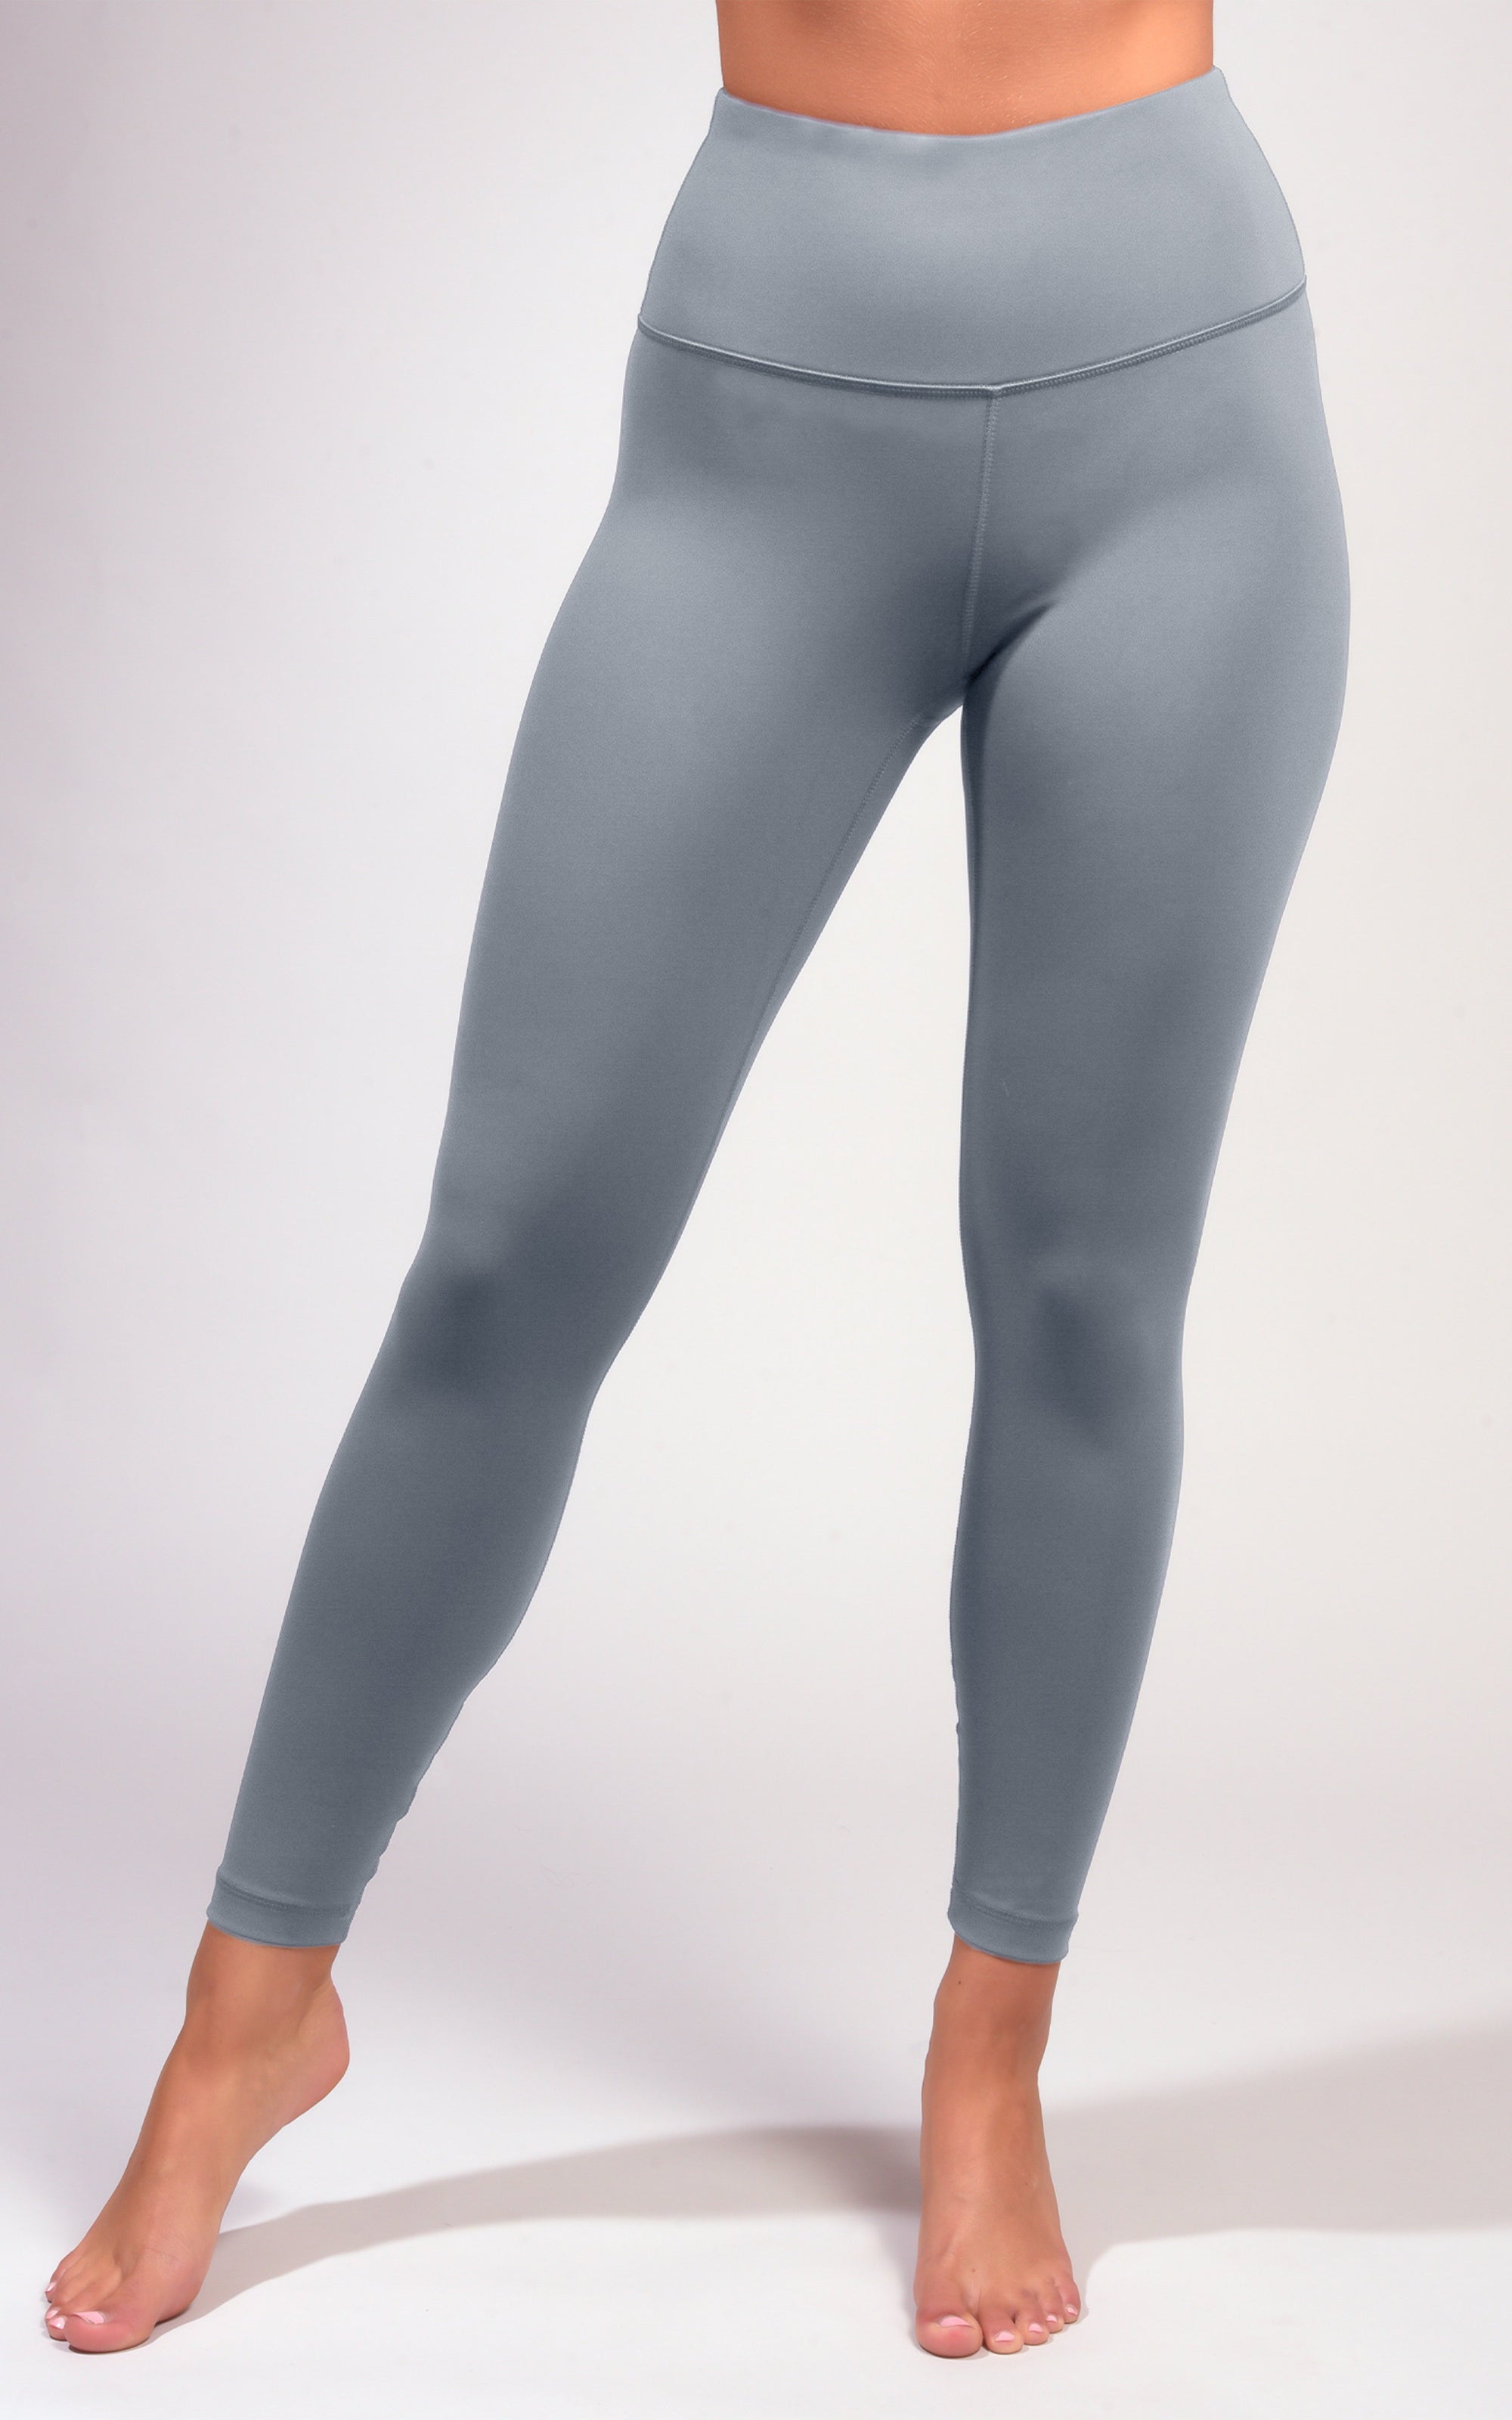 90 DEGREE BY REFLEX CARBON INTERLINK HIGH RISE LEGGING AW72339 Navy Blue XS  for sale online